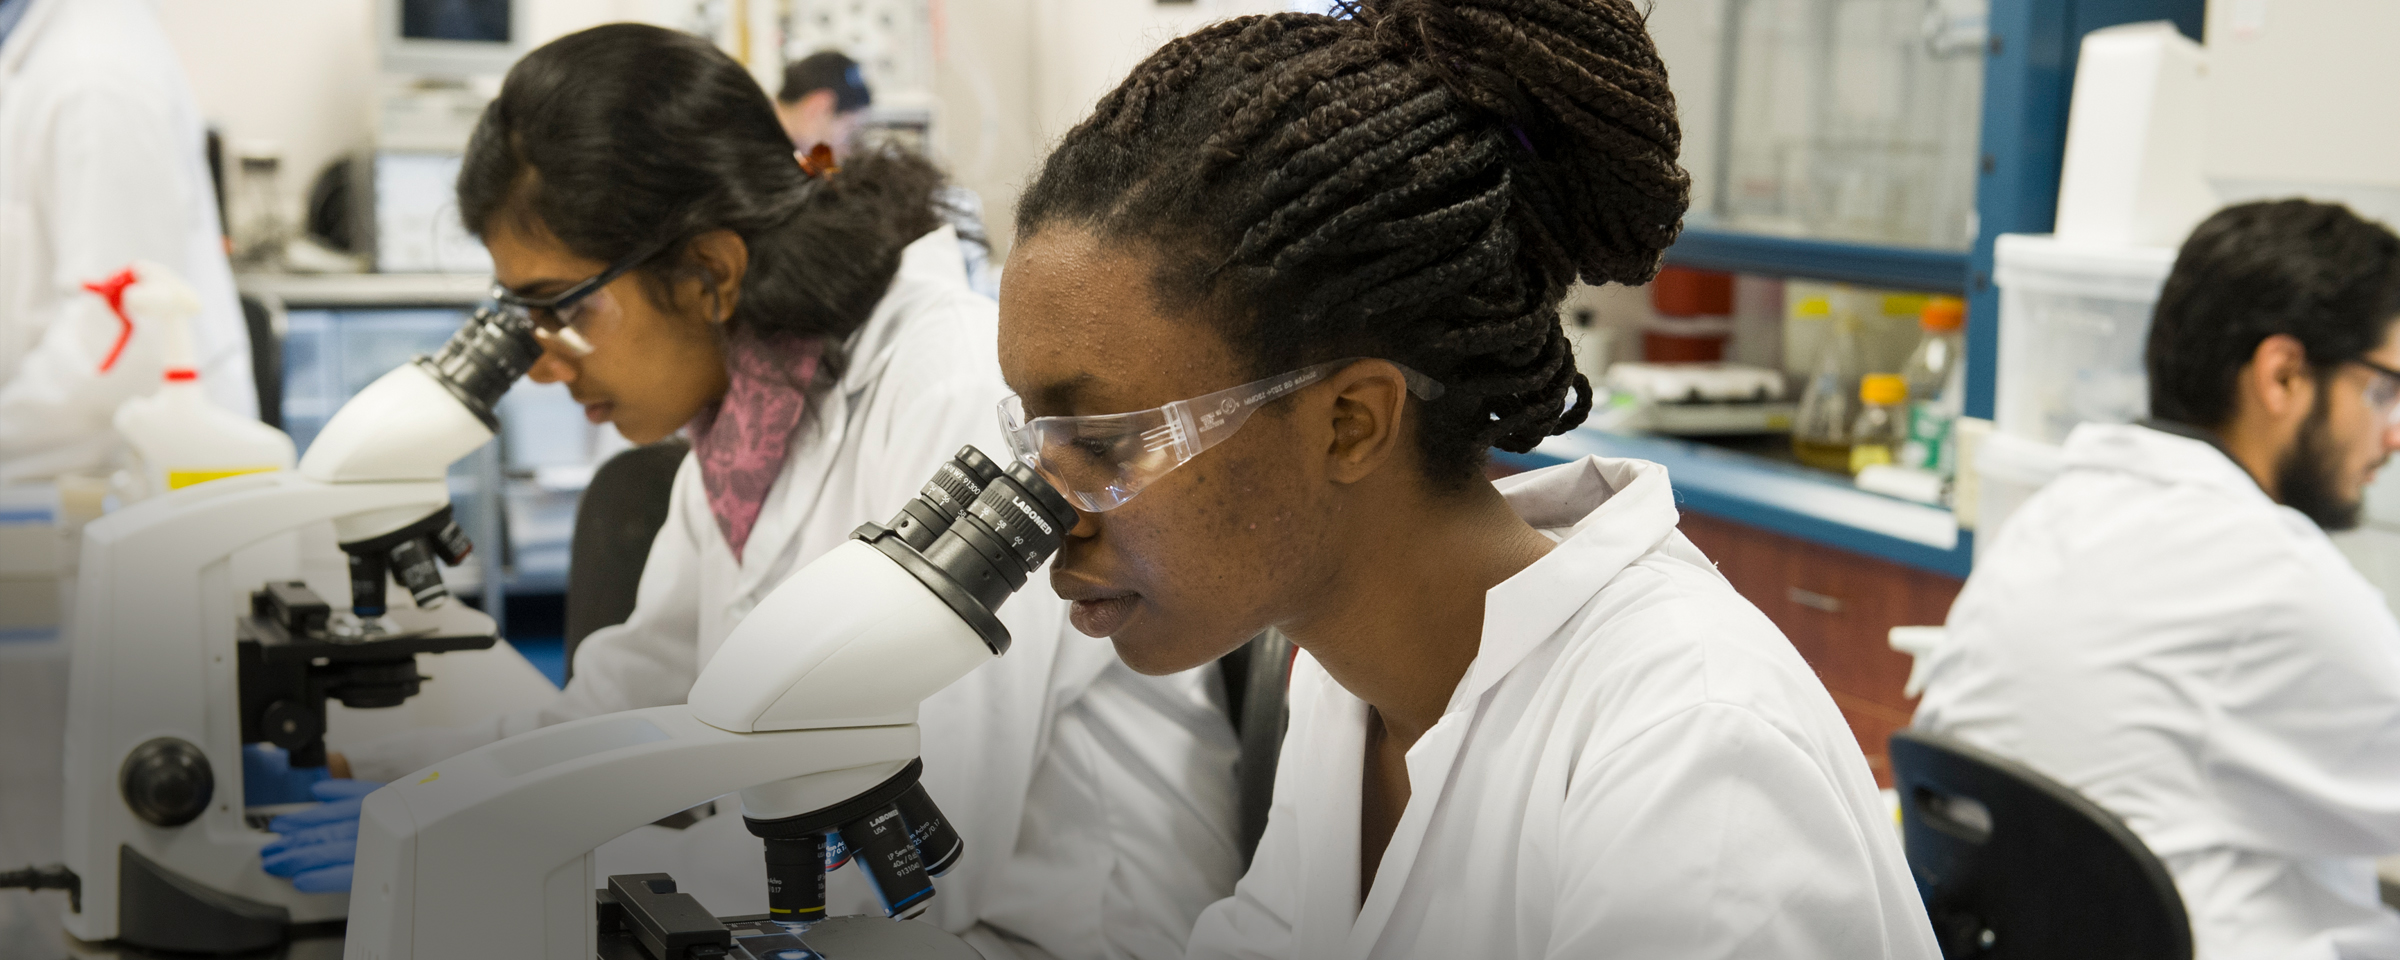 Pharmaceutical students in a lab looking at specimens through a microscope